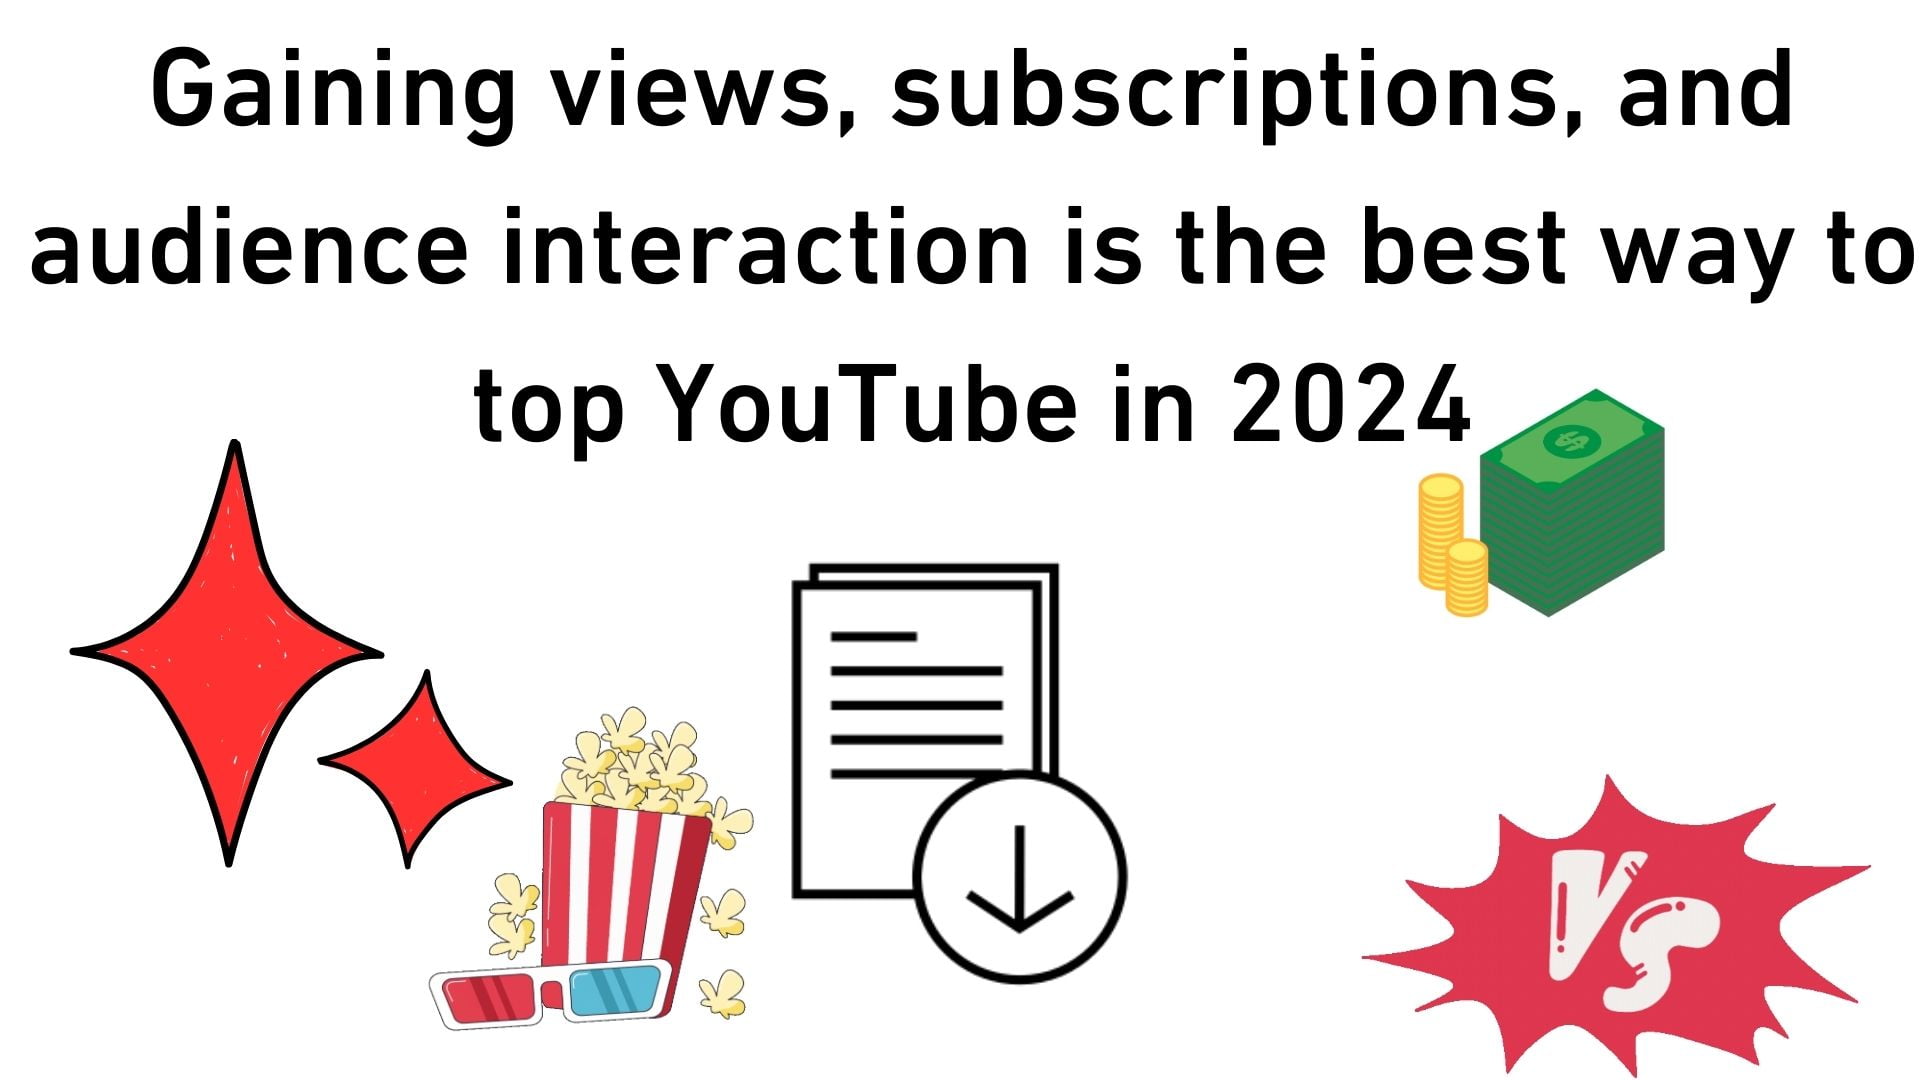 Gaining Views, Subscriptions, And Audience Interaction Is The Best Way To Top Youtube In 2024